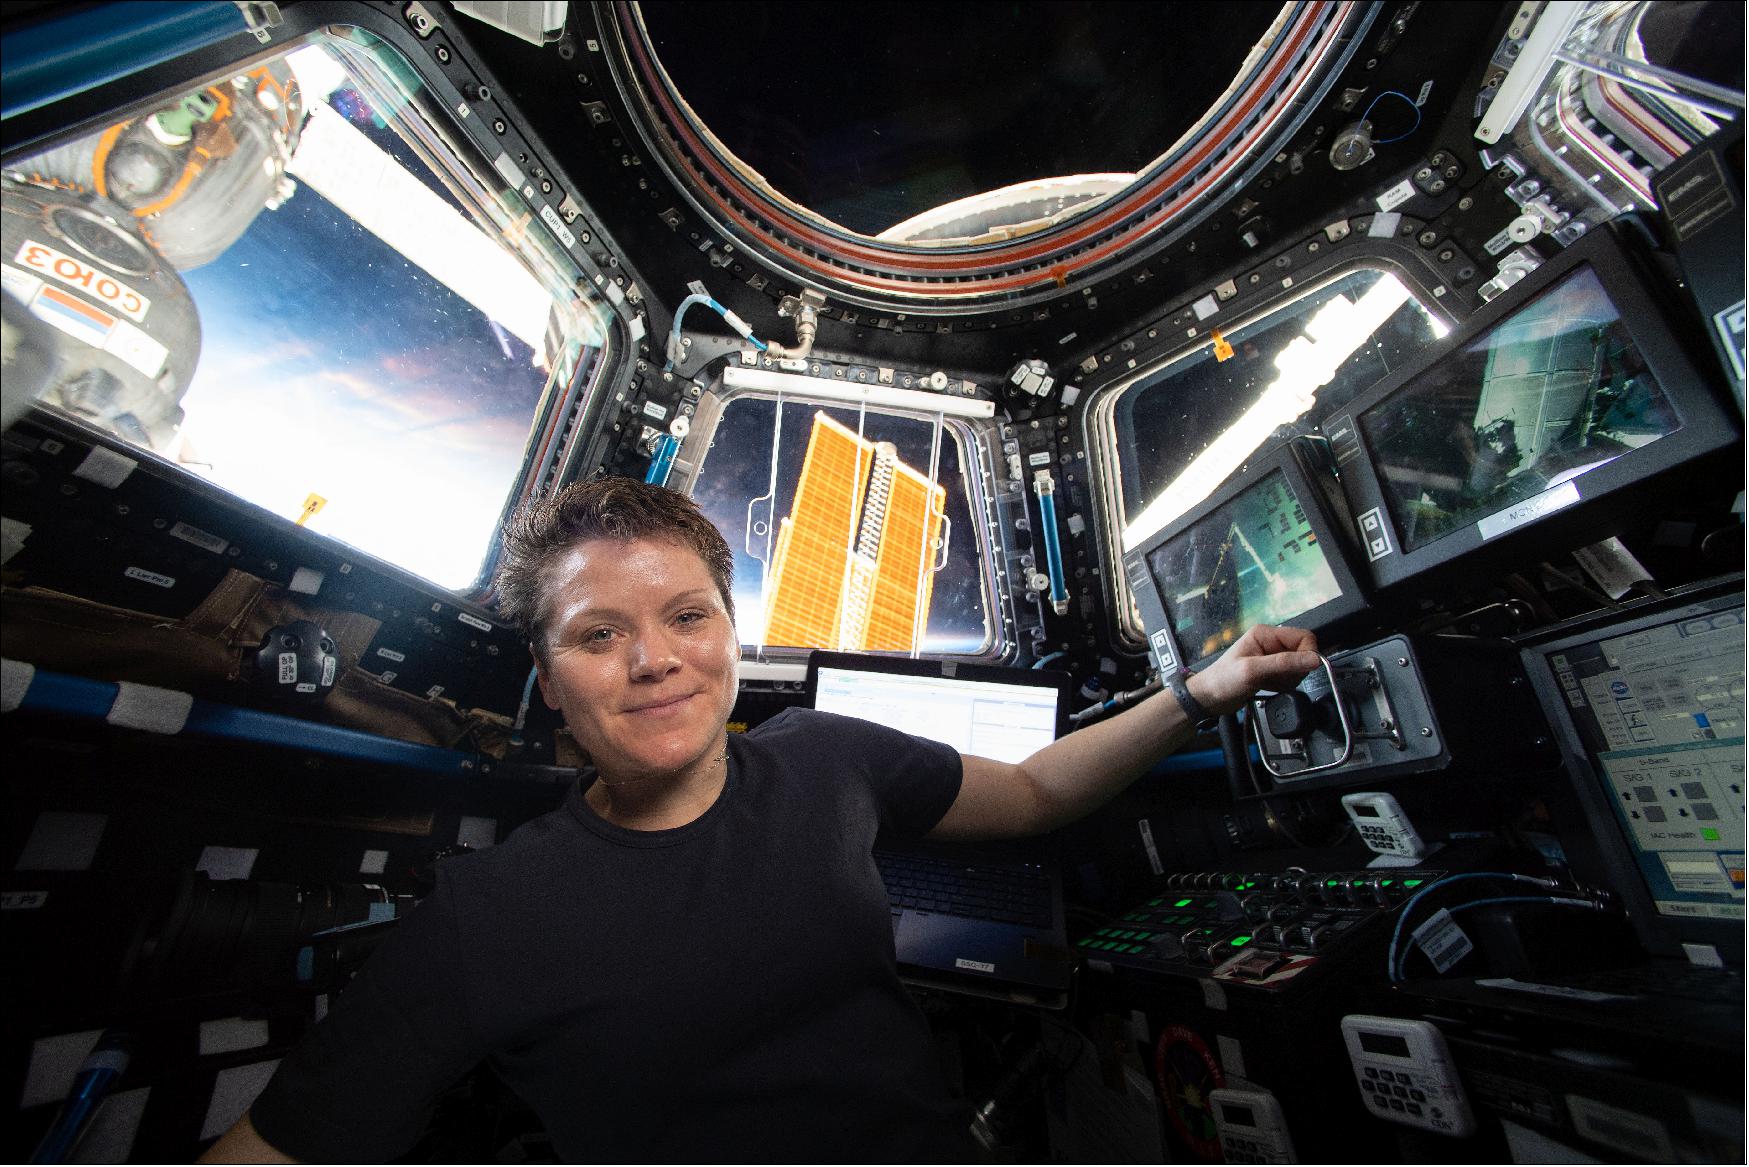 Figure 84: NASA astronaut Anne McClain in the Cupola module of the International Space Station takes a break while practising Canadarm2 robotics and Cygnus spacecraft capture techniques, 16 April 2019 (image credit: NASA)